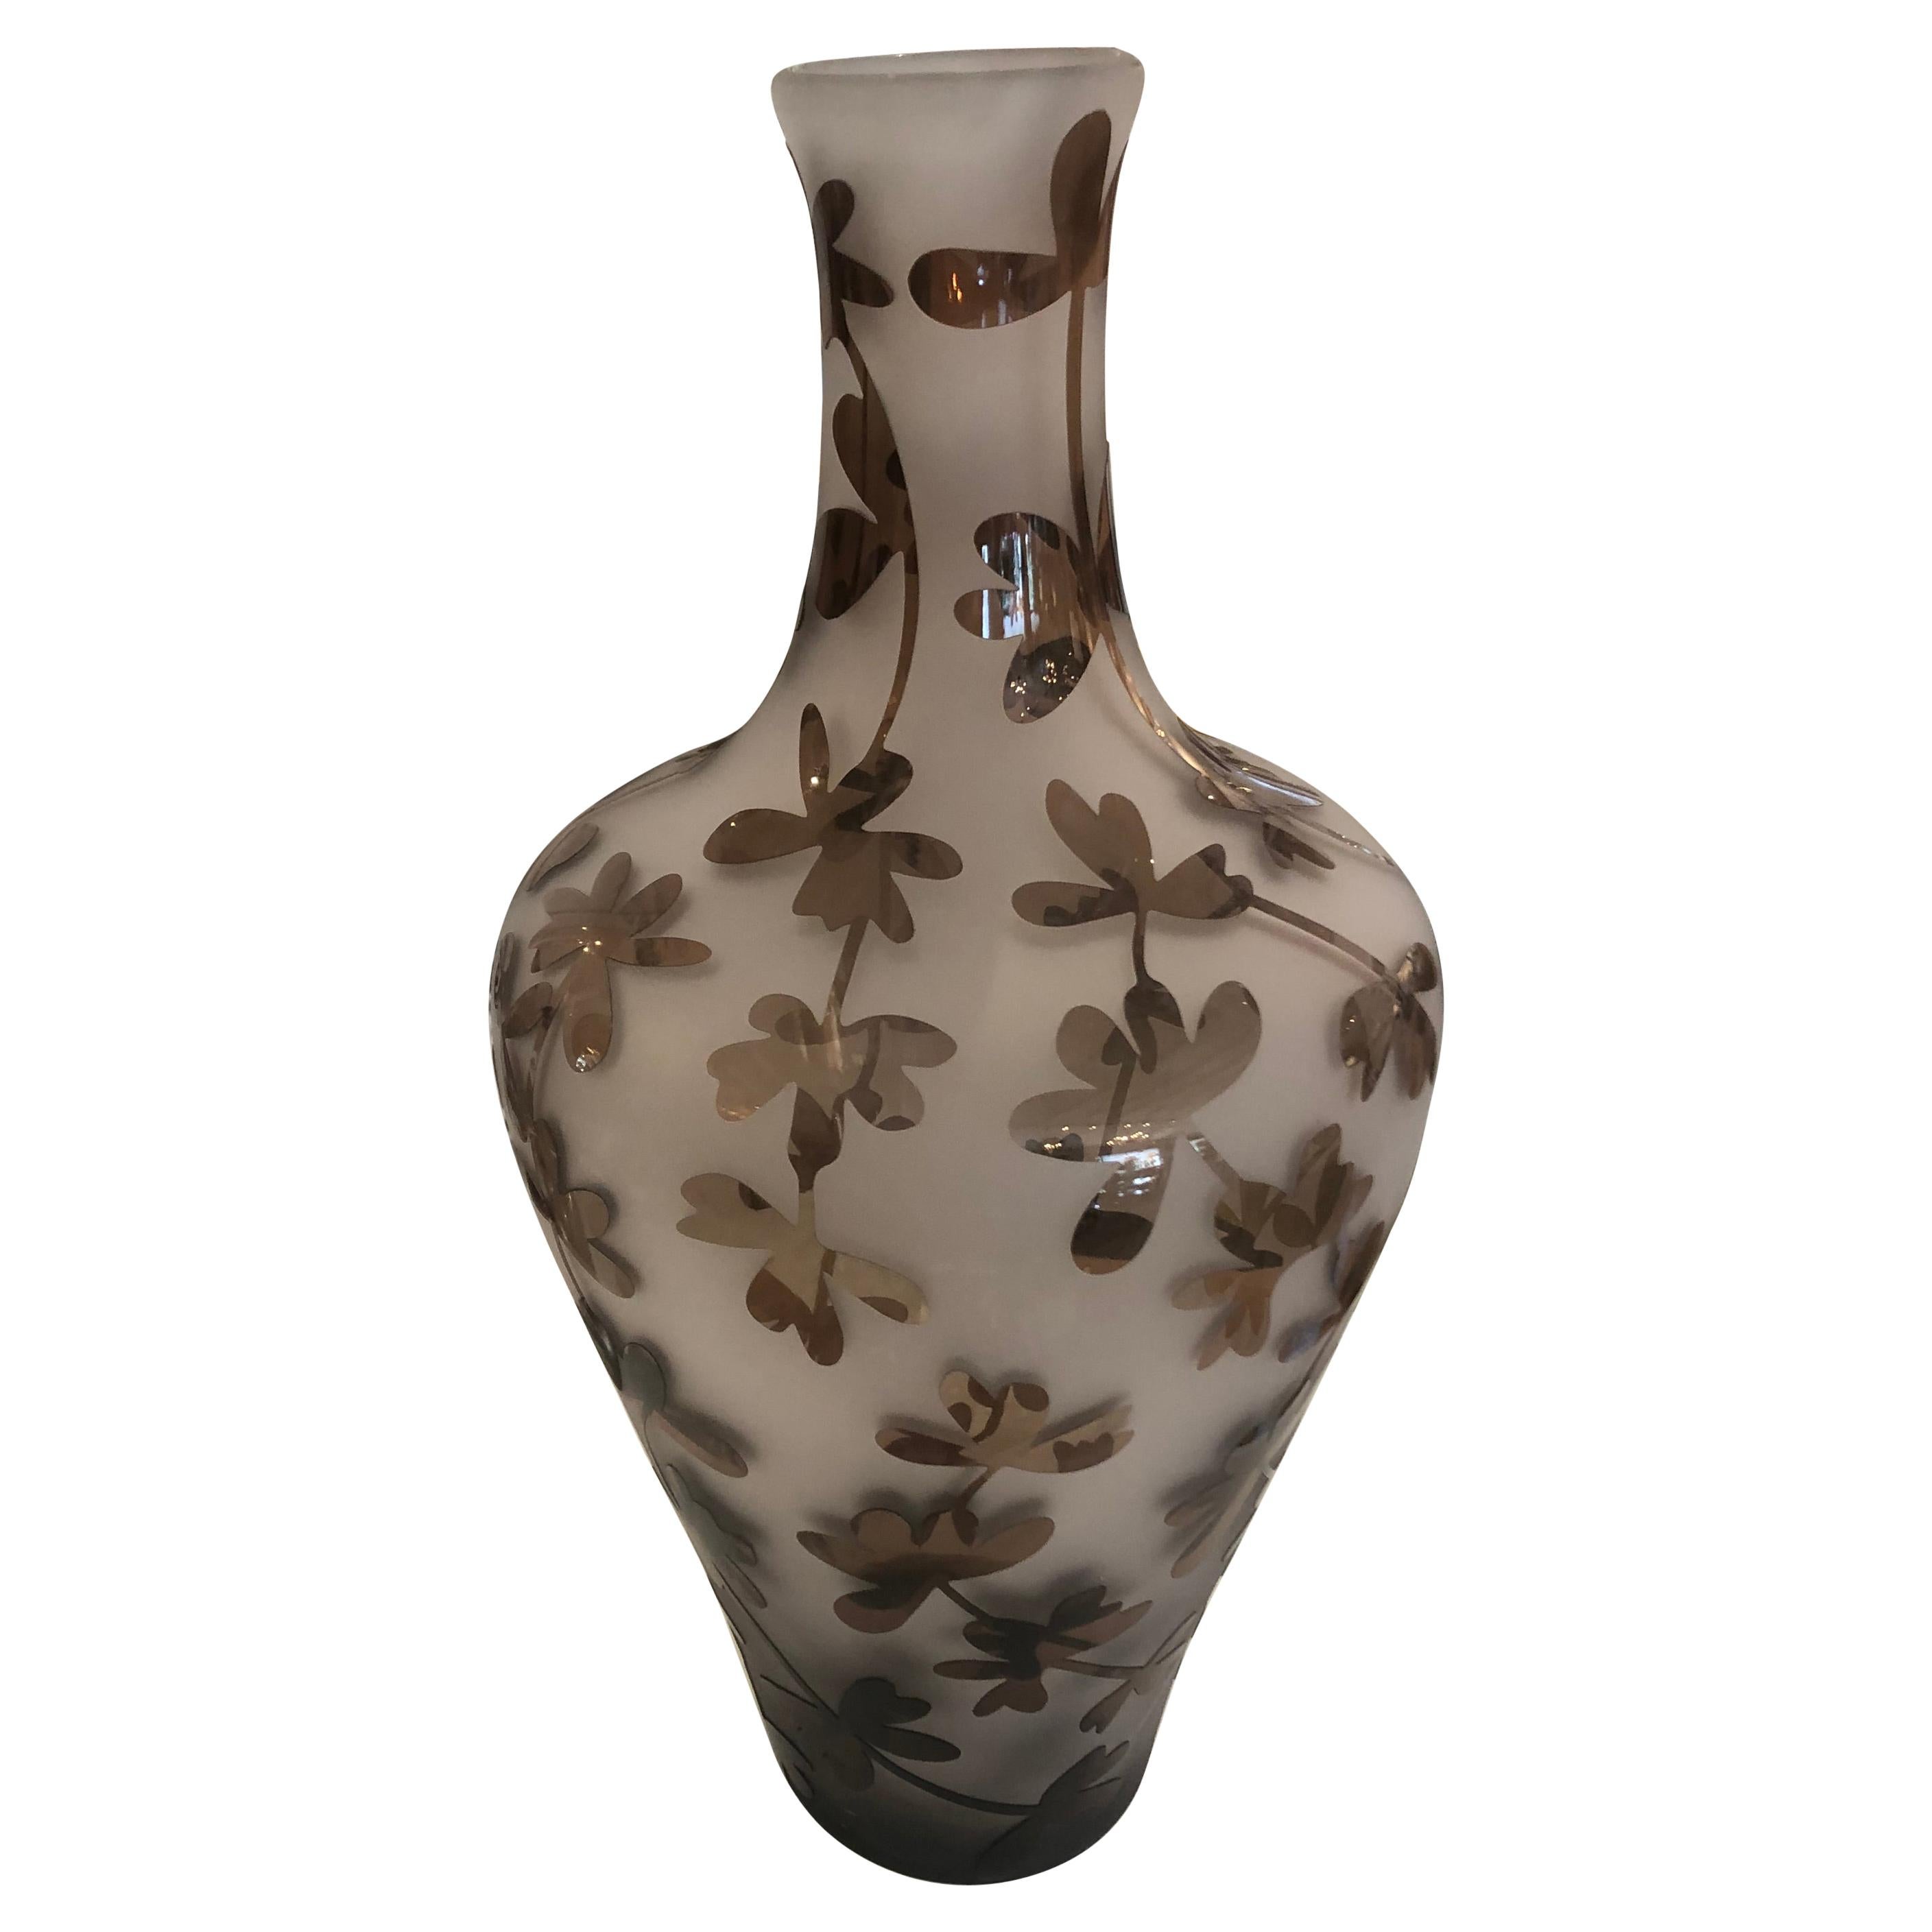 Striking & Graphic Large Contemporary Art Glass Vase with Floral Motife For Sale